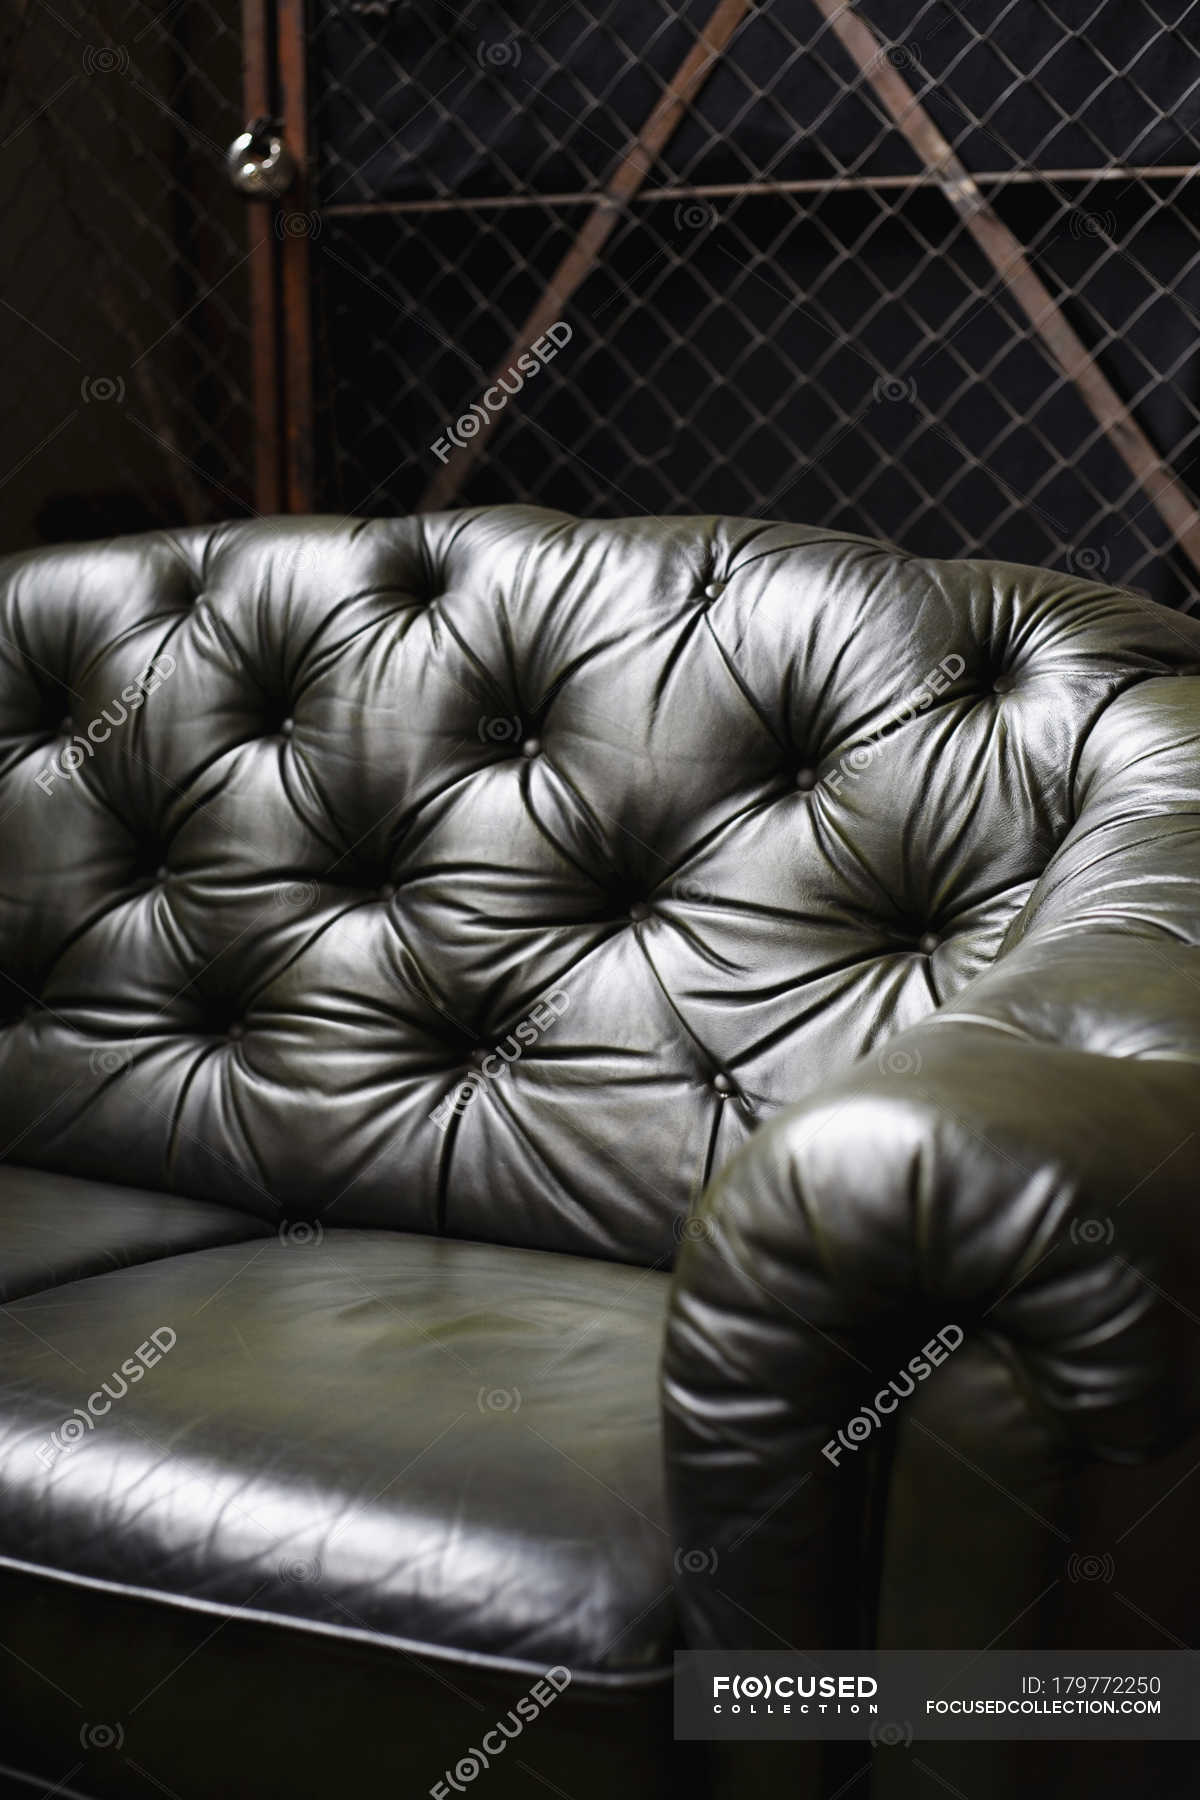 Crop Black Luxury Leather Sofa, Luxury Leather Couch